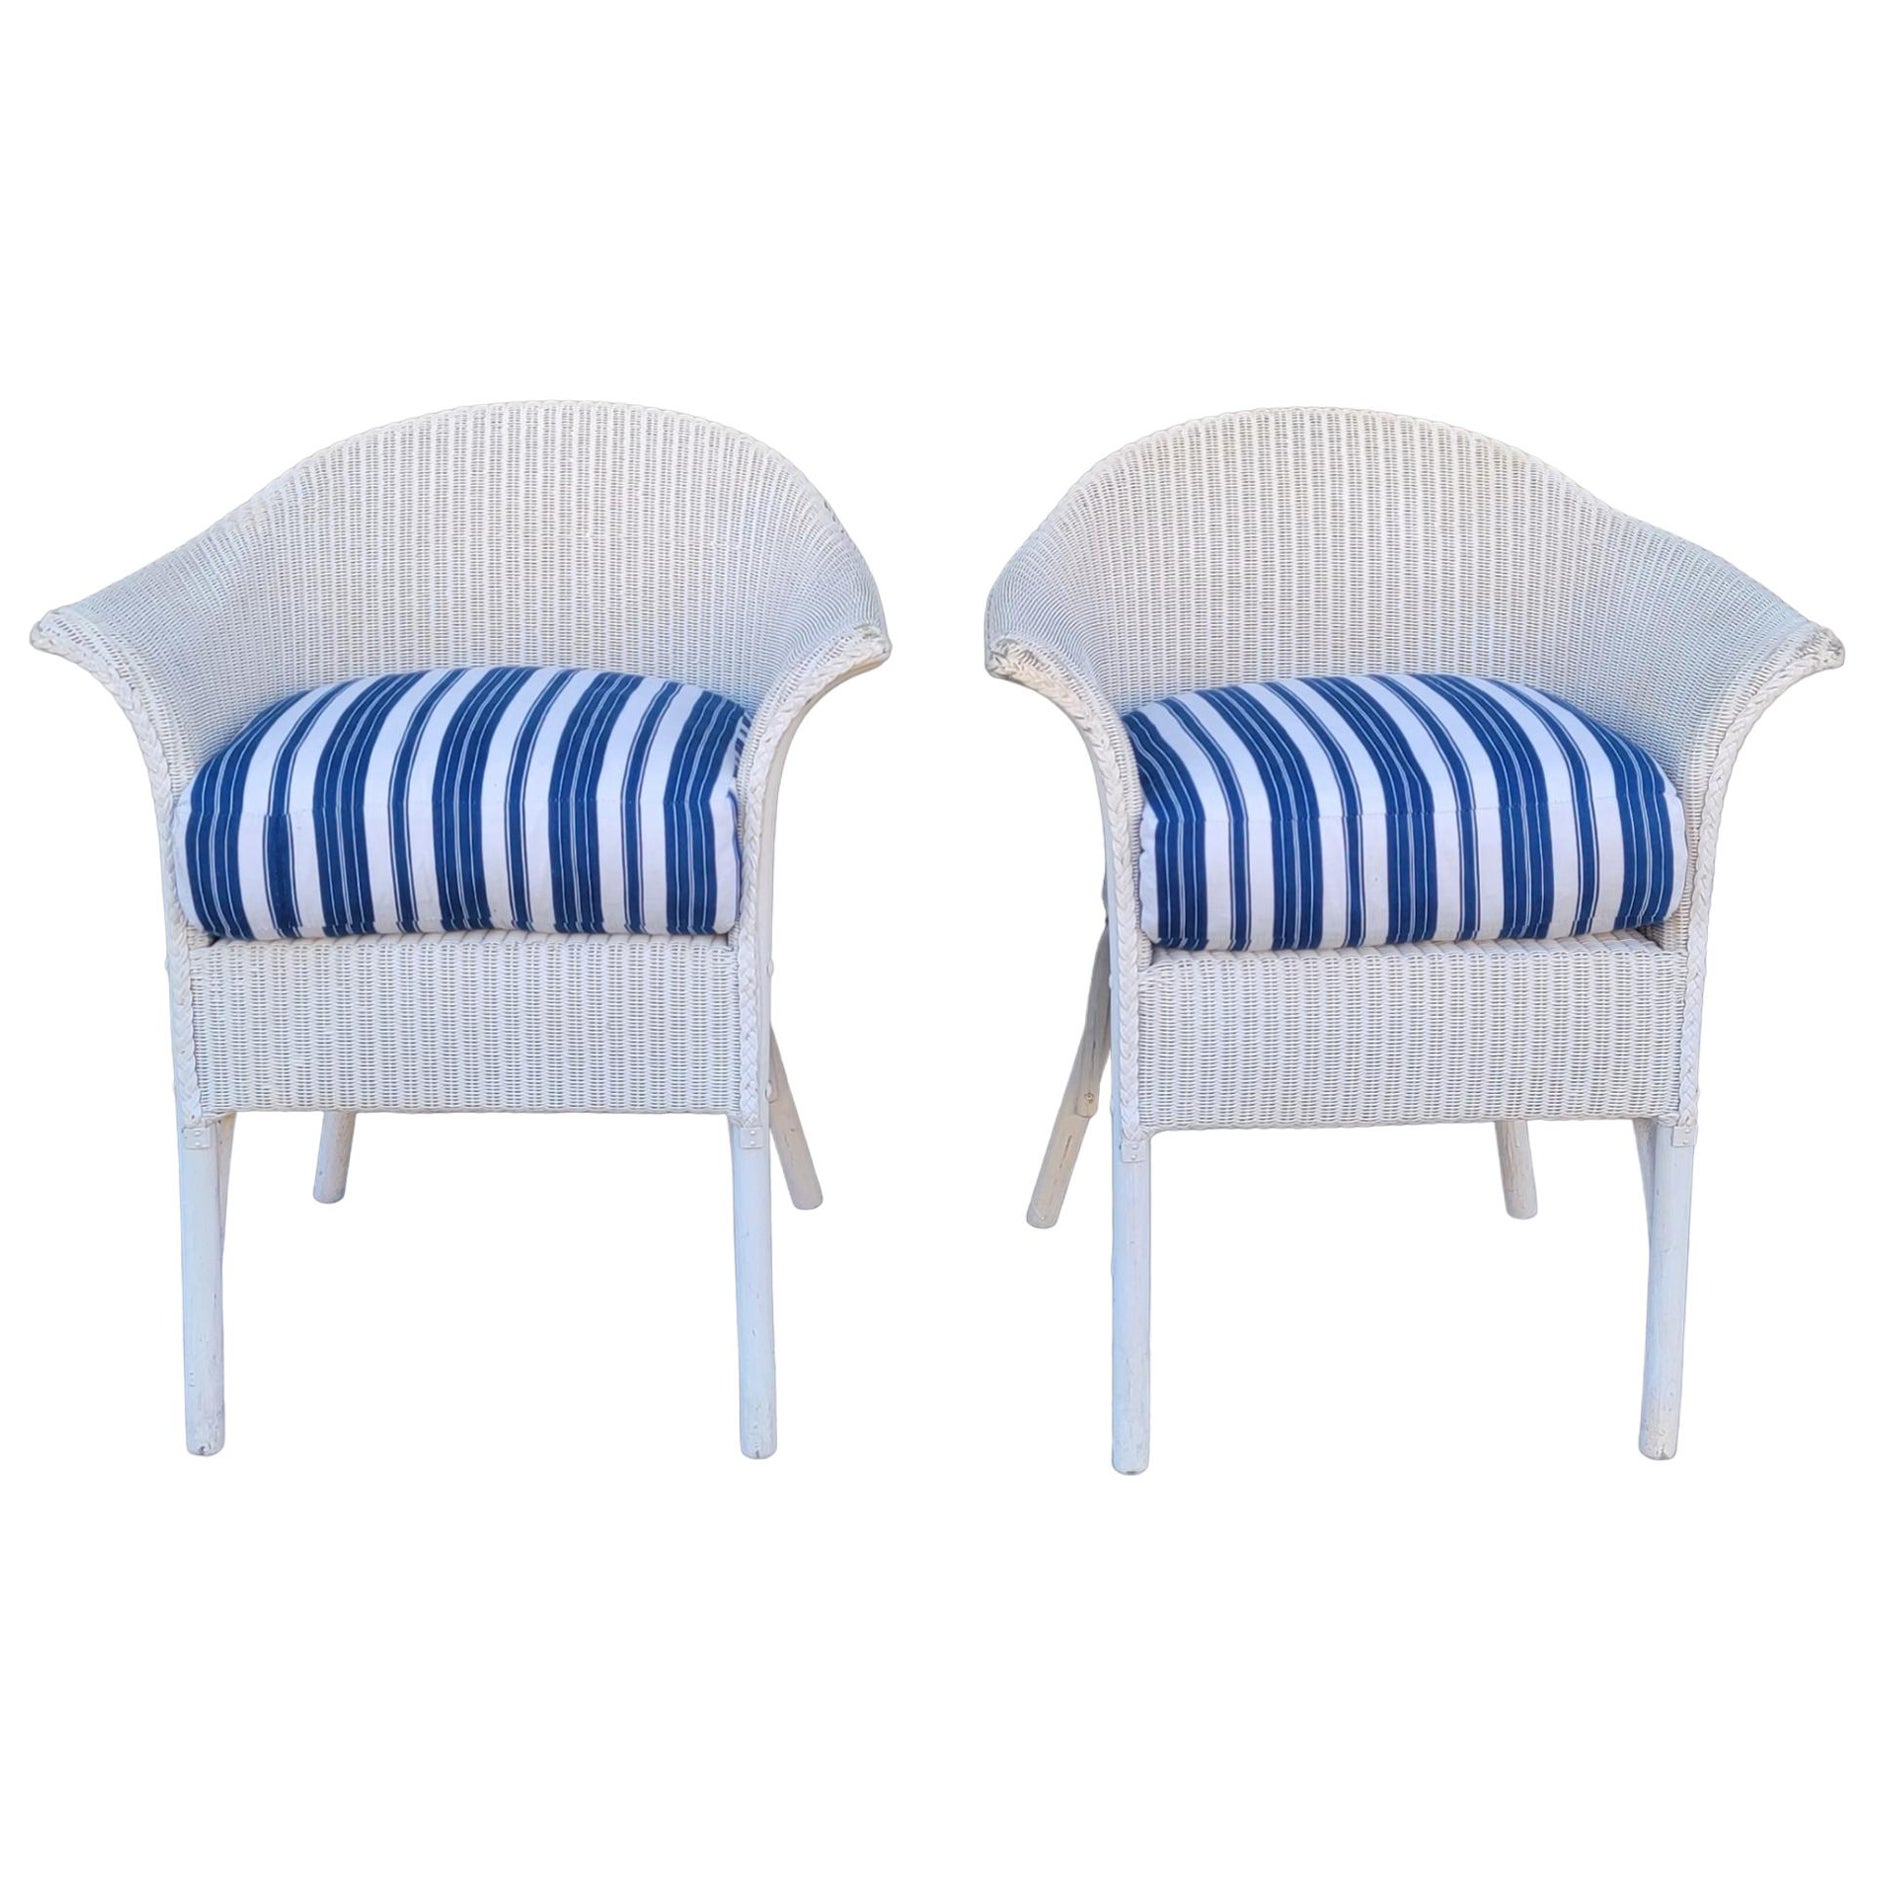 Mid-20th Century Signed Lloyd Loom White Wicker Chairs W/ Antique Ticking Cushions For Sale